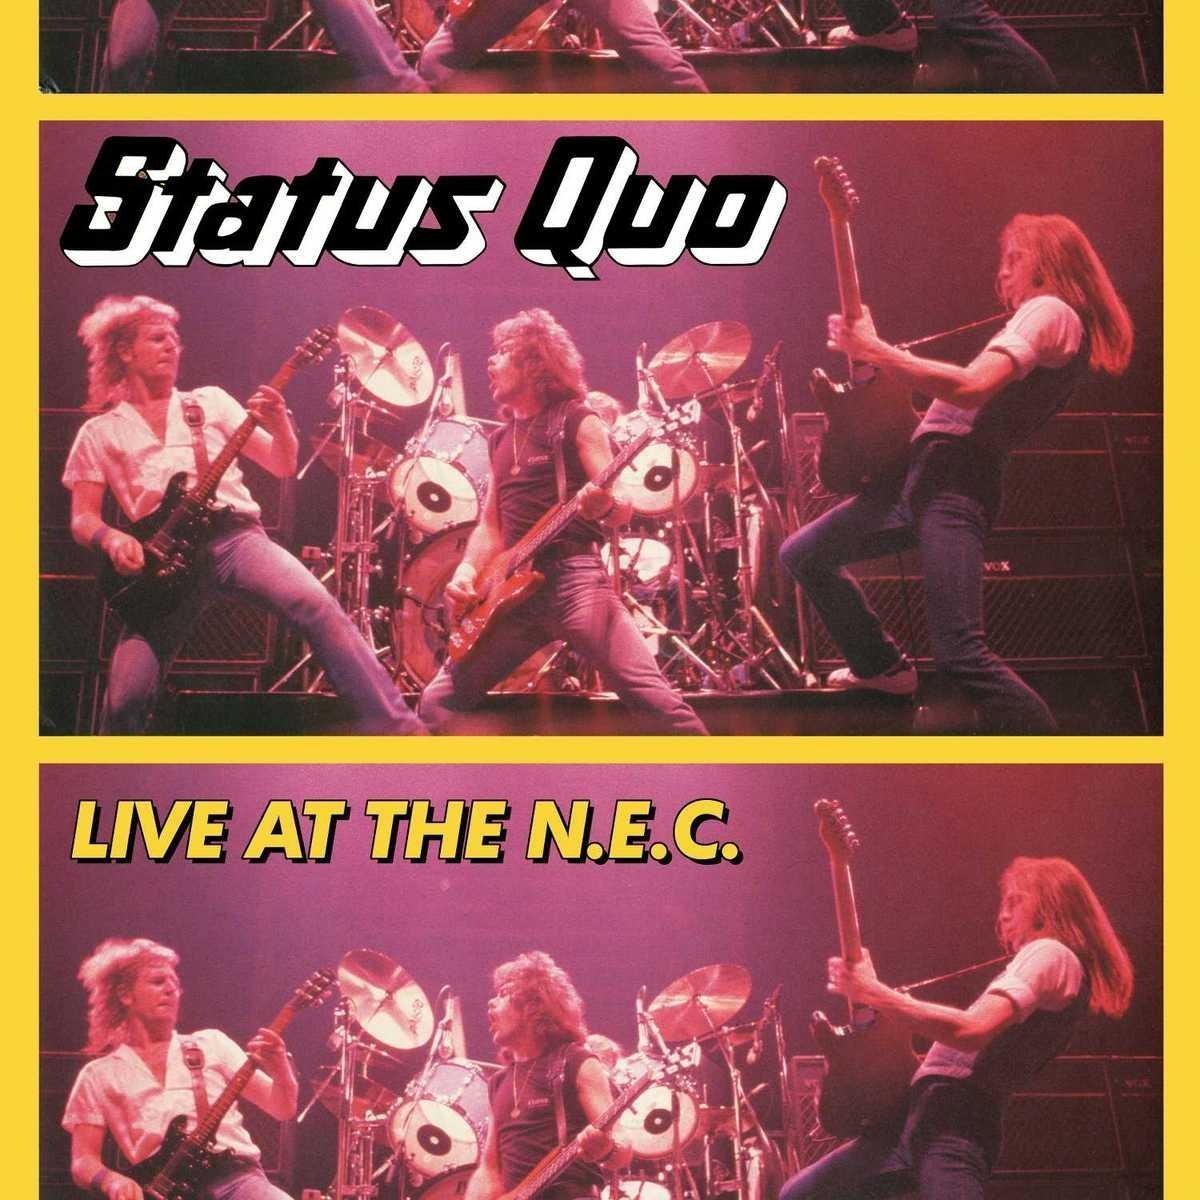 2 Cds Status Quo Live At The N.e.c.